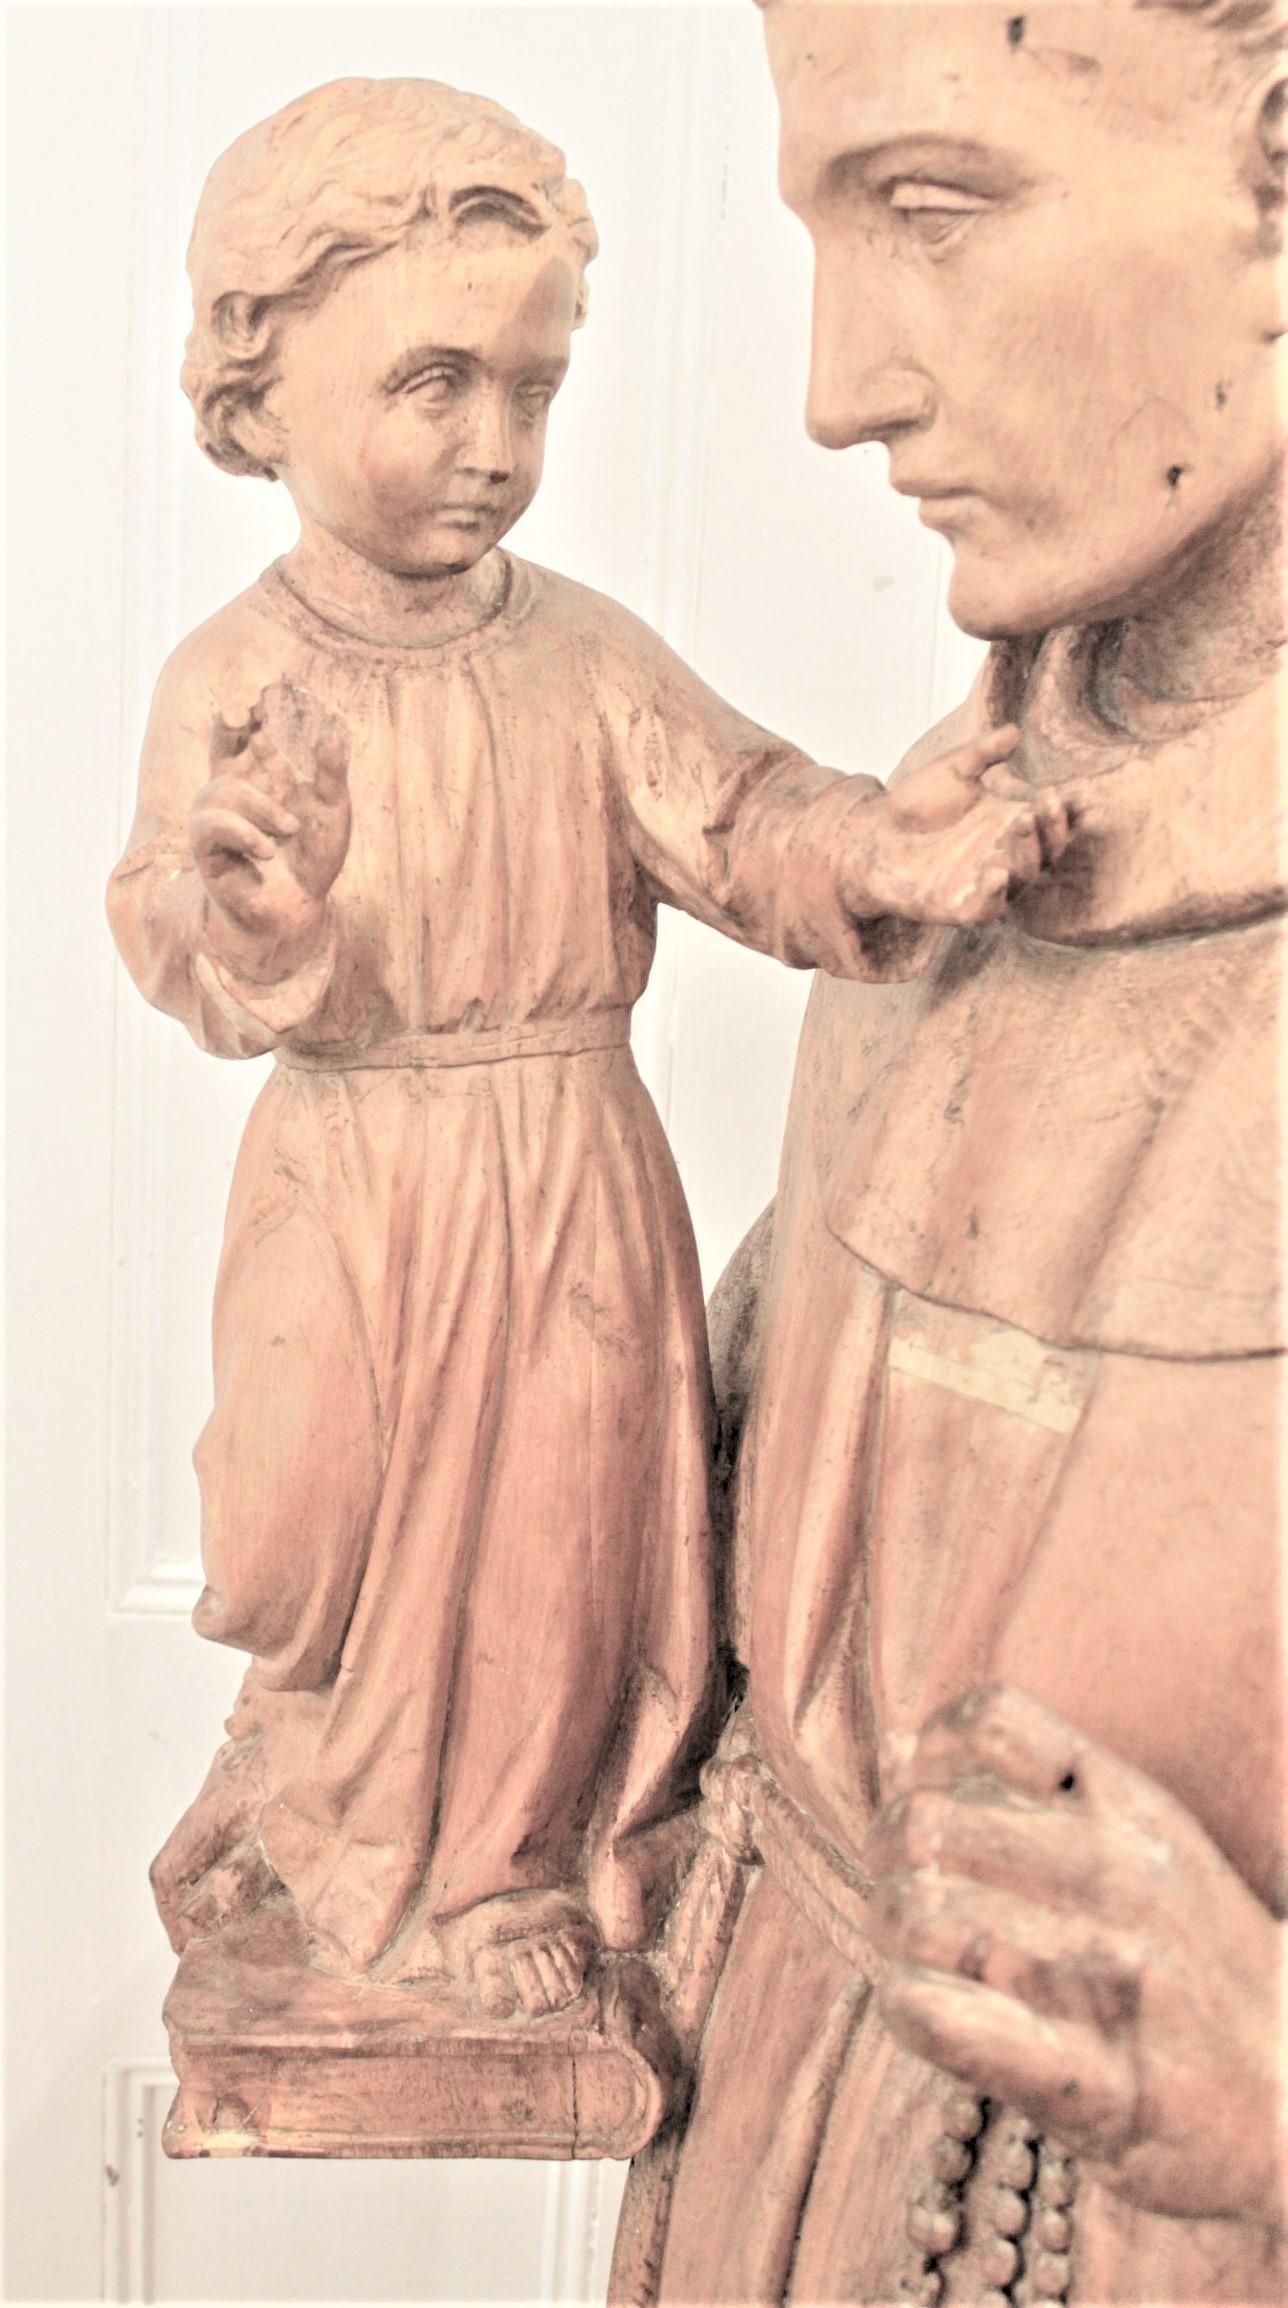 Large Antique Quebec Hand Carved Wooden Sculpture of St. Anthony & Jesus In Good Condition For Sale In Hamilton, Ontario